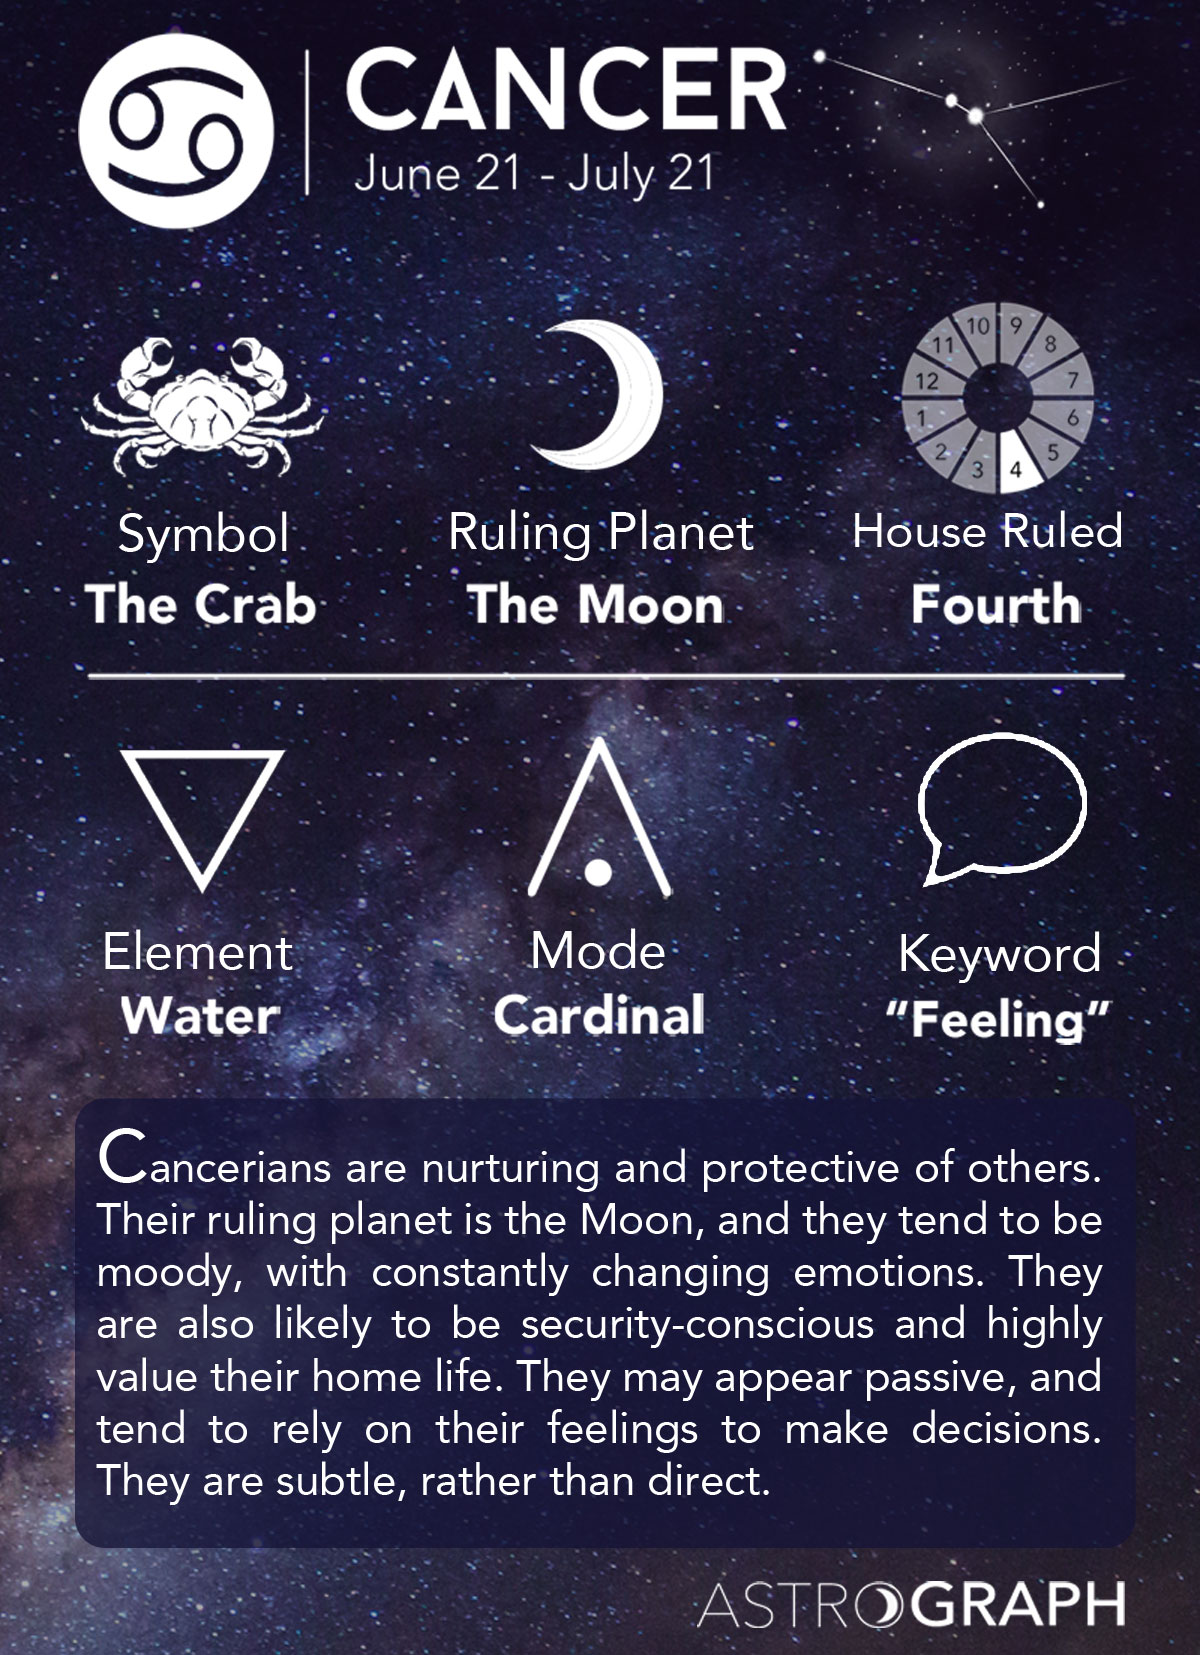 What Is The Cancer Moon?